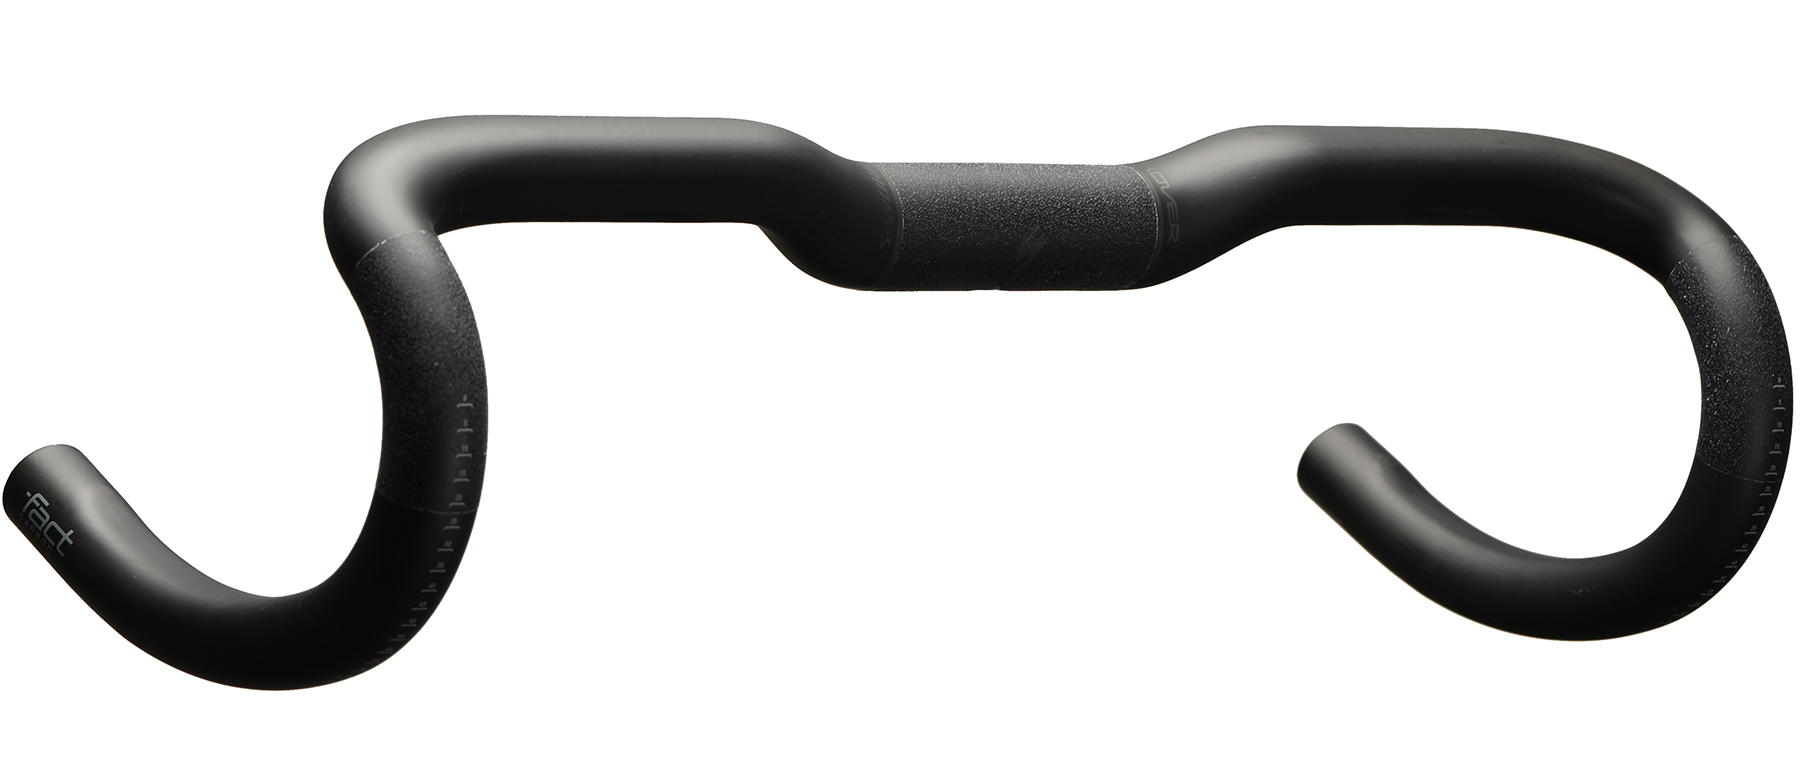 Specialized S-Works Hover Carbon Handlebar